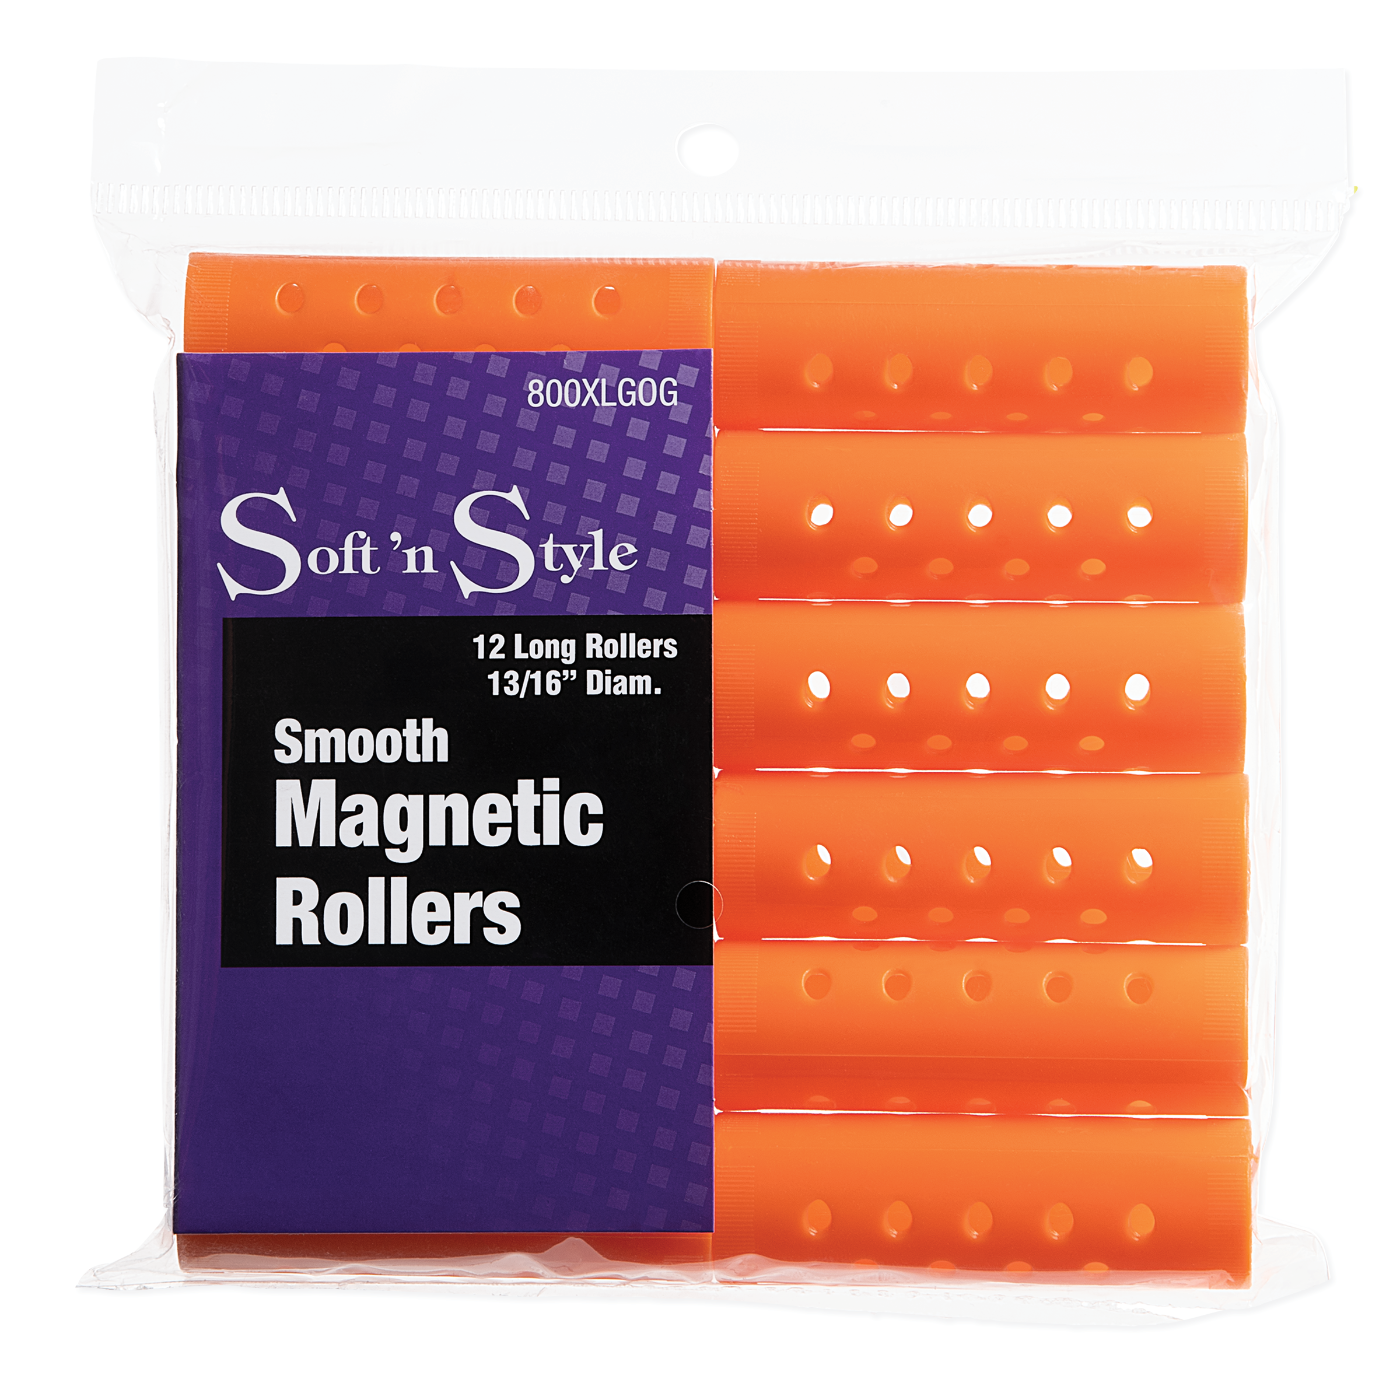 Smooth Magnetic Rollers, Long Orange - 13/16"